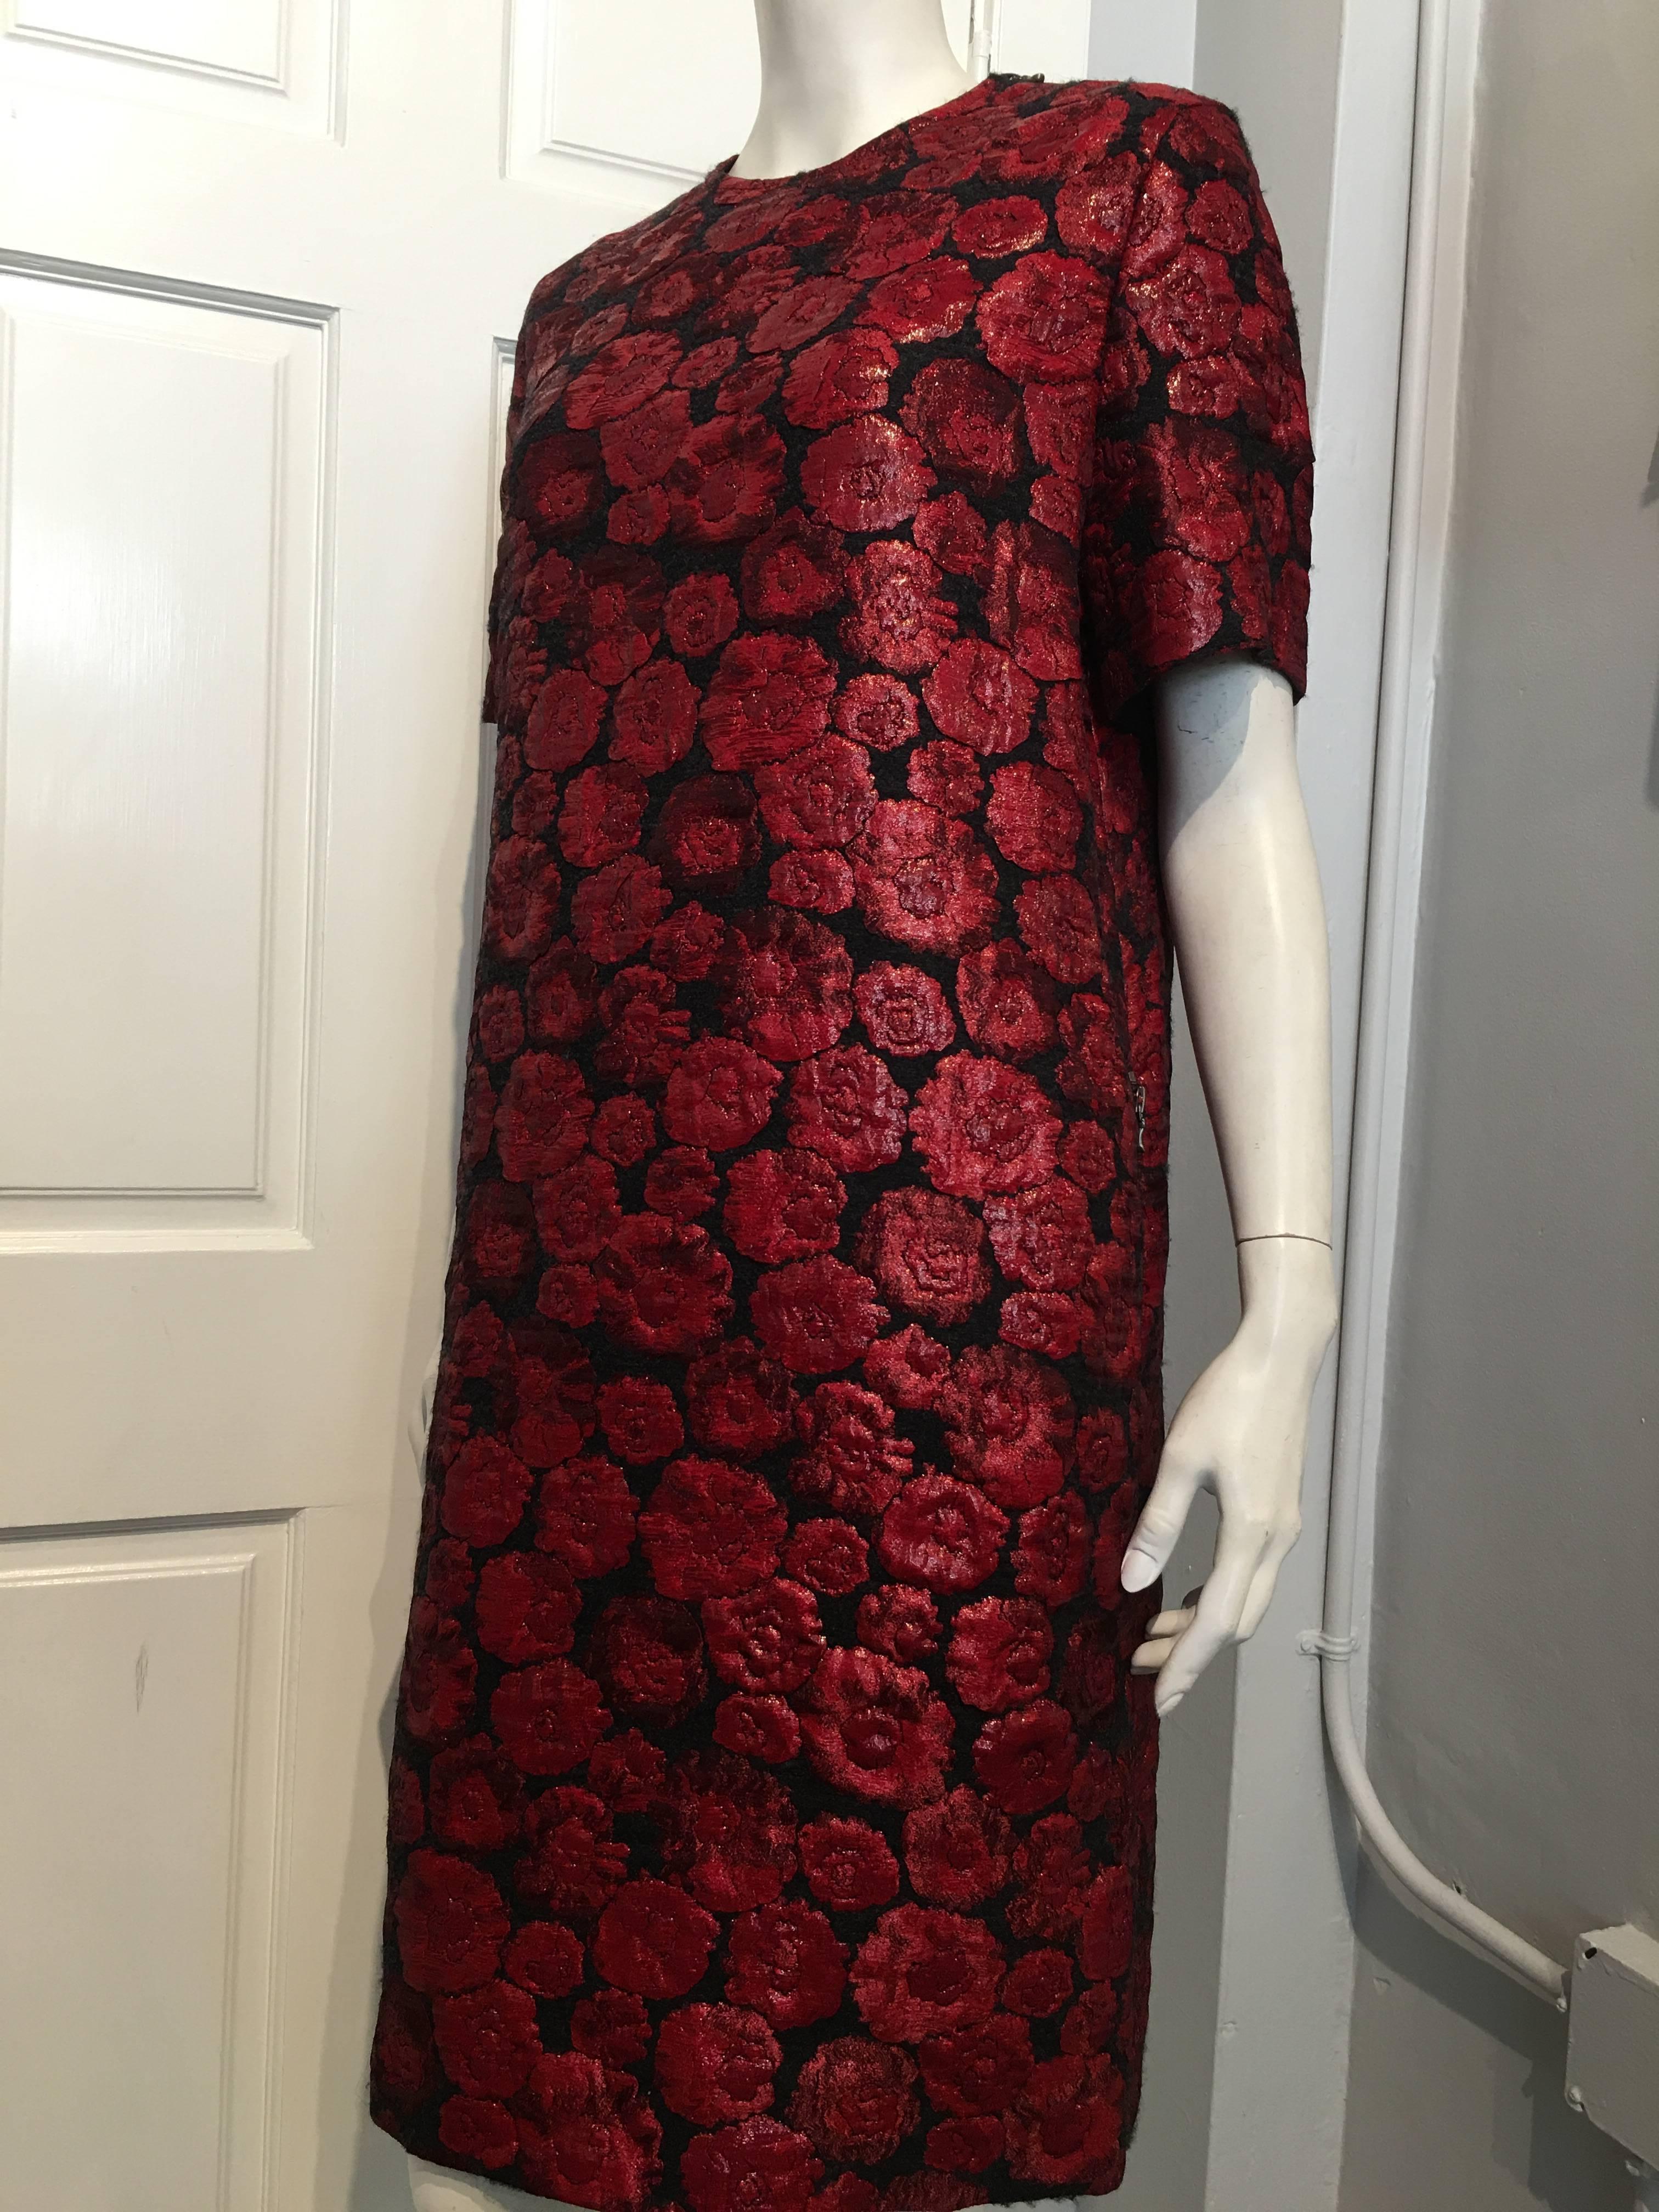 Lanvin dress in black wool with shiny red floral design. It has a bronze colored zipper on the left shoulder and zipper on each of the side pockets. The sleeves are 10